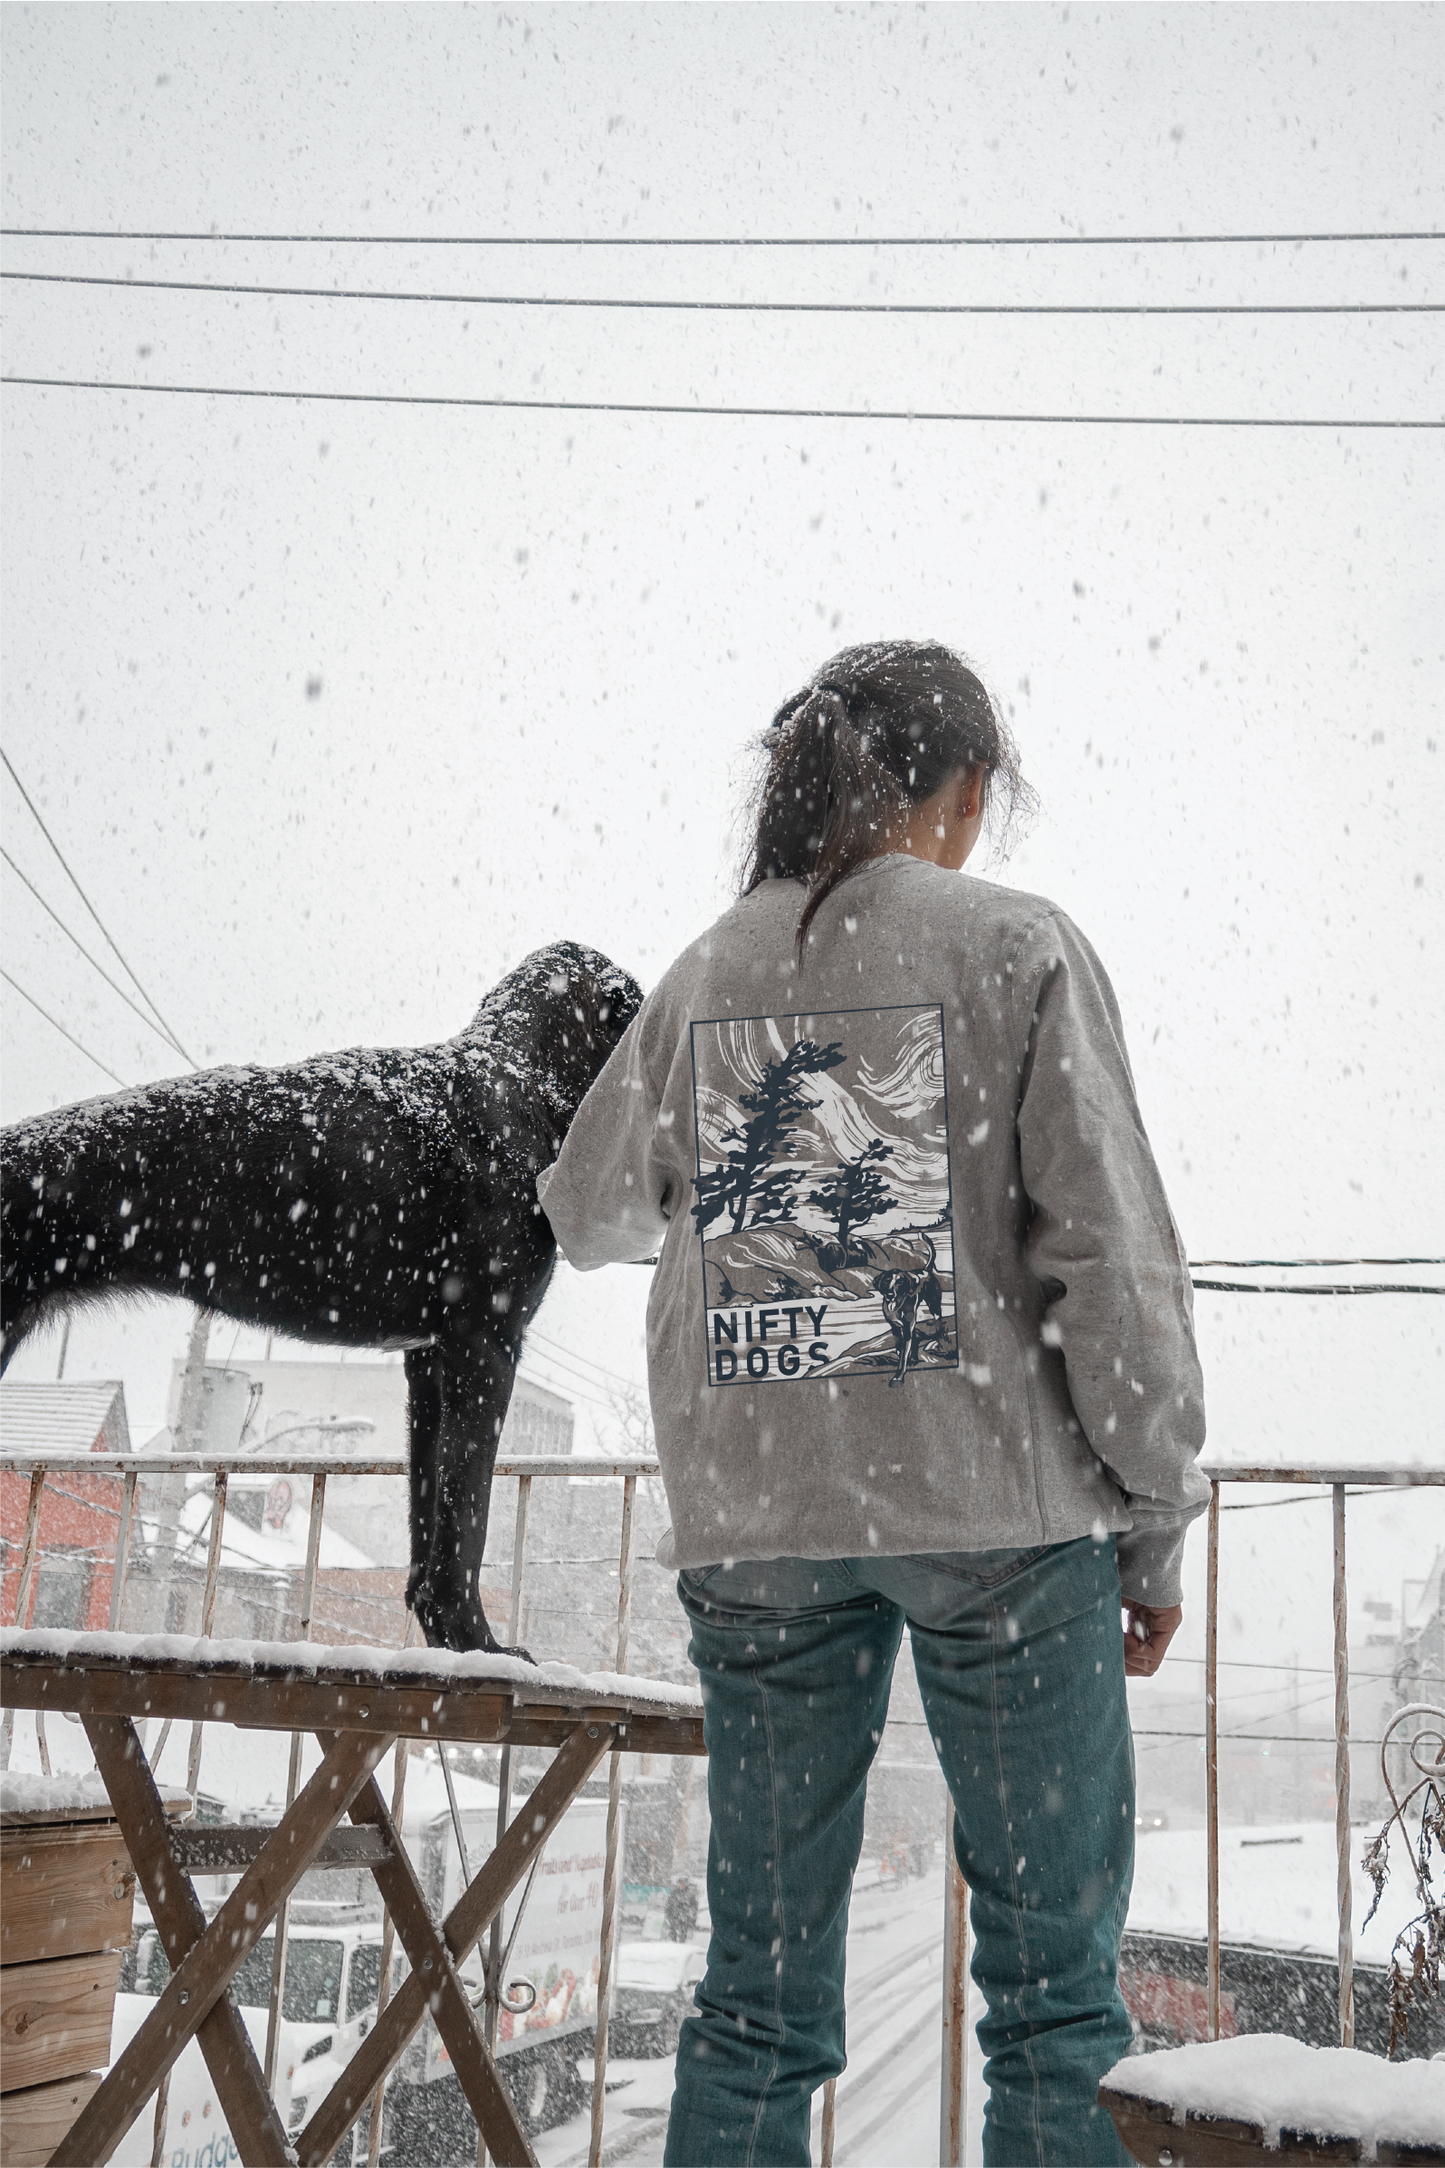 Back of Nifty Dogs grey crewneck worn on person beside dog in snow